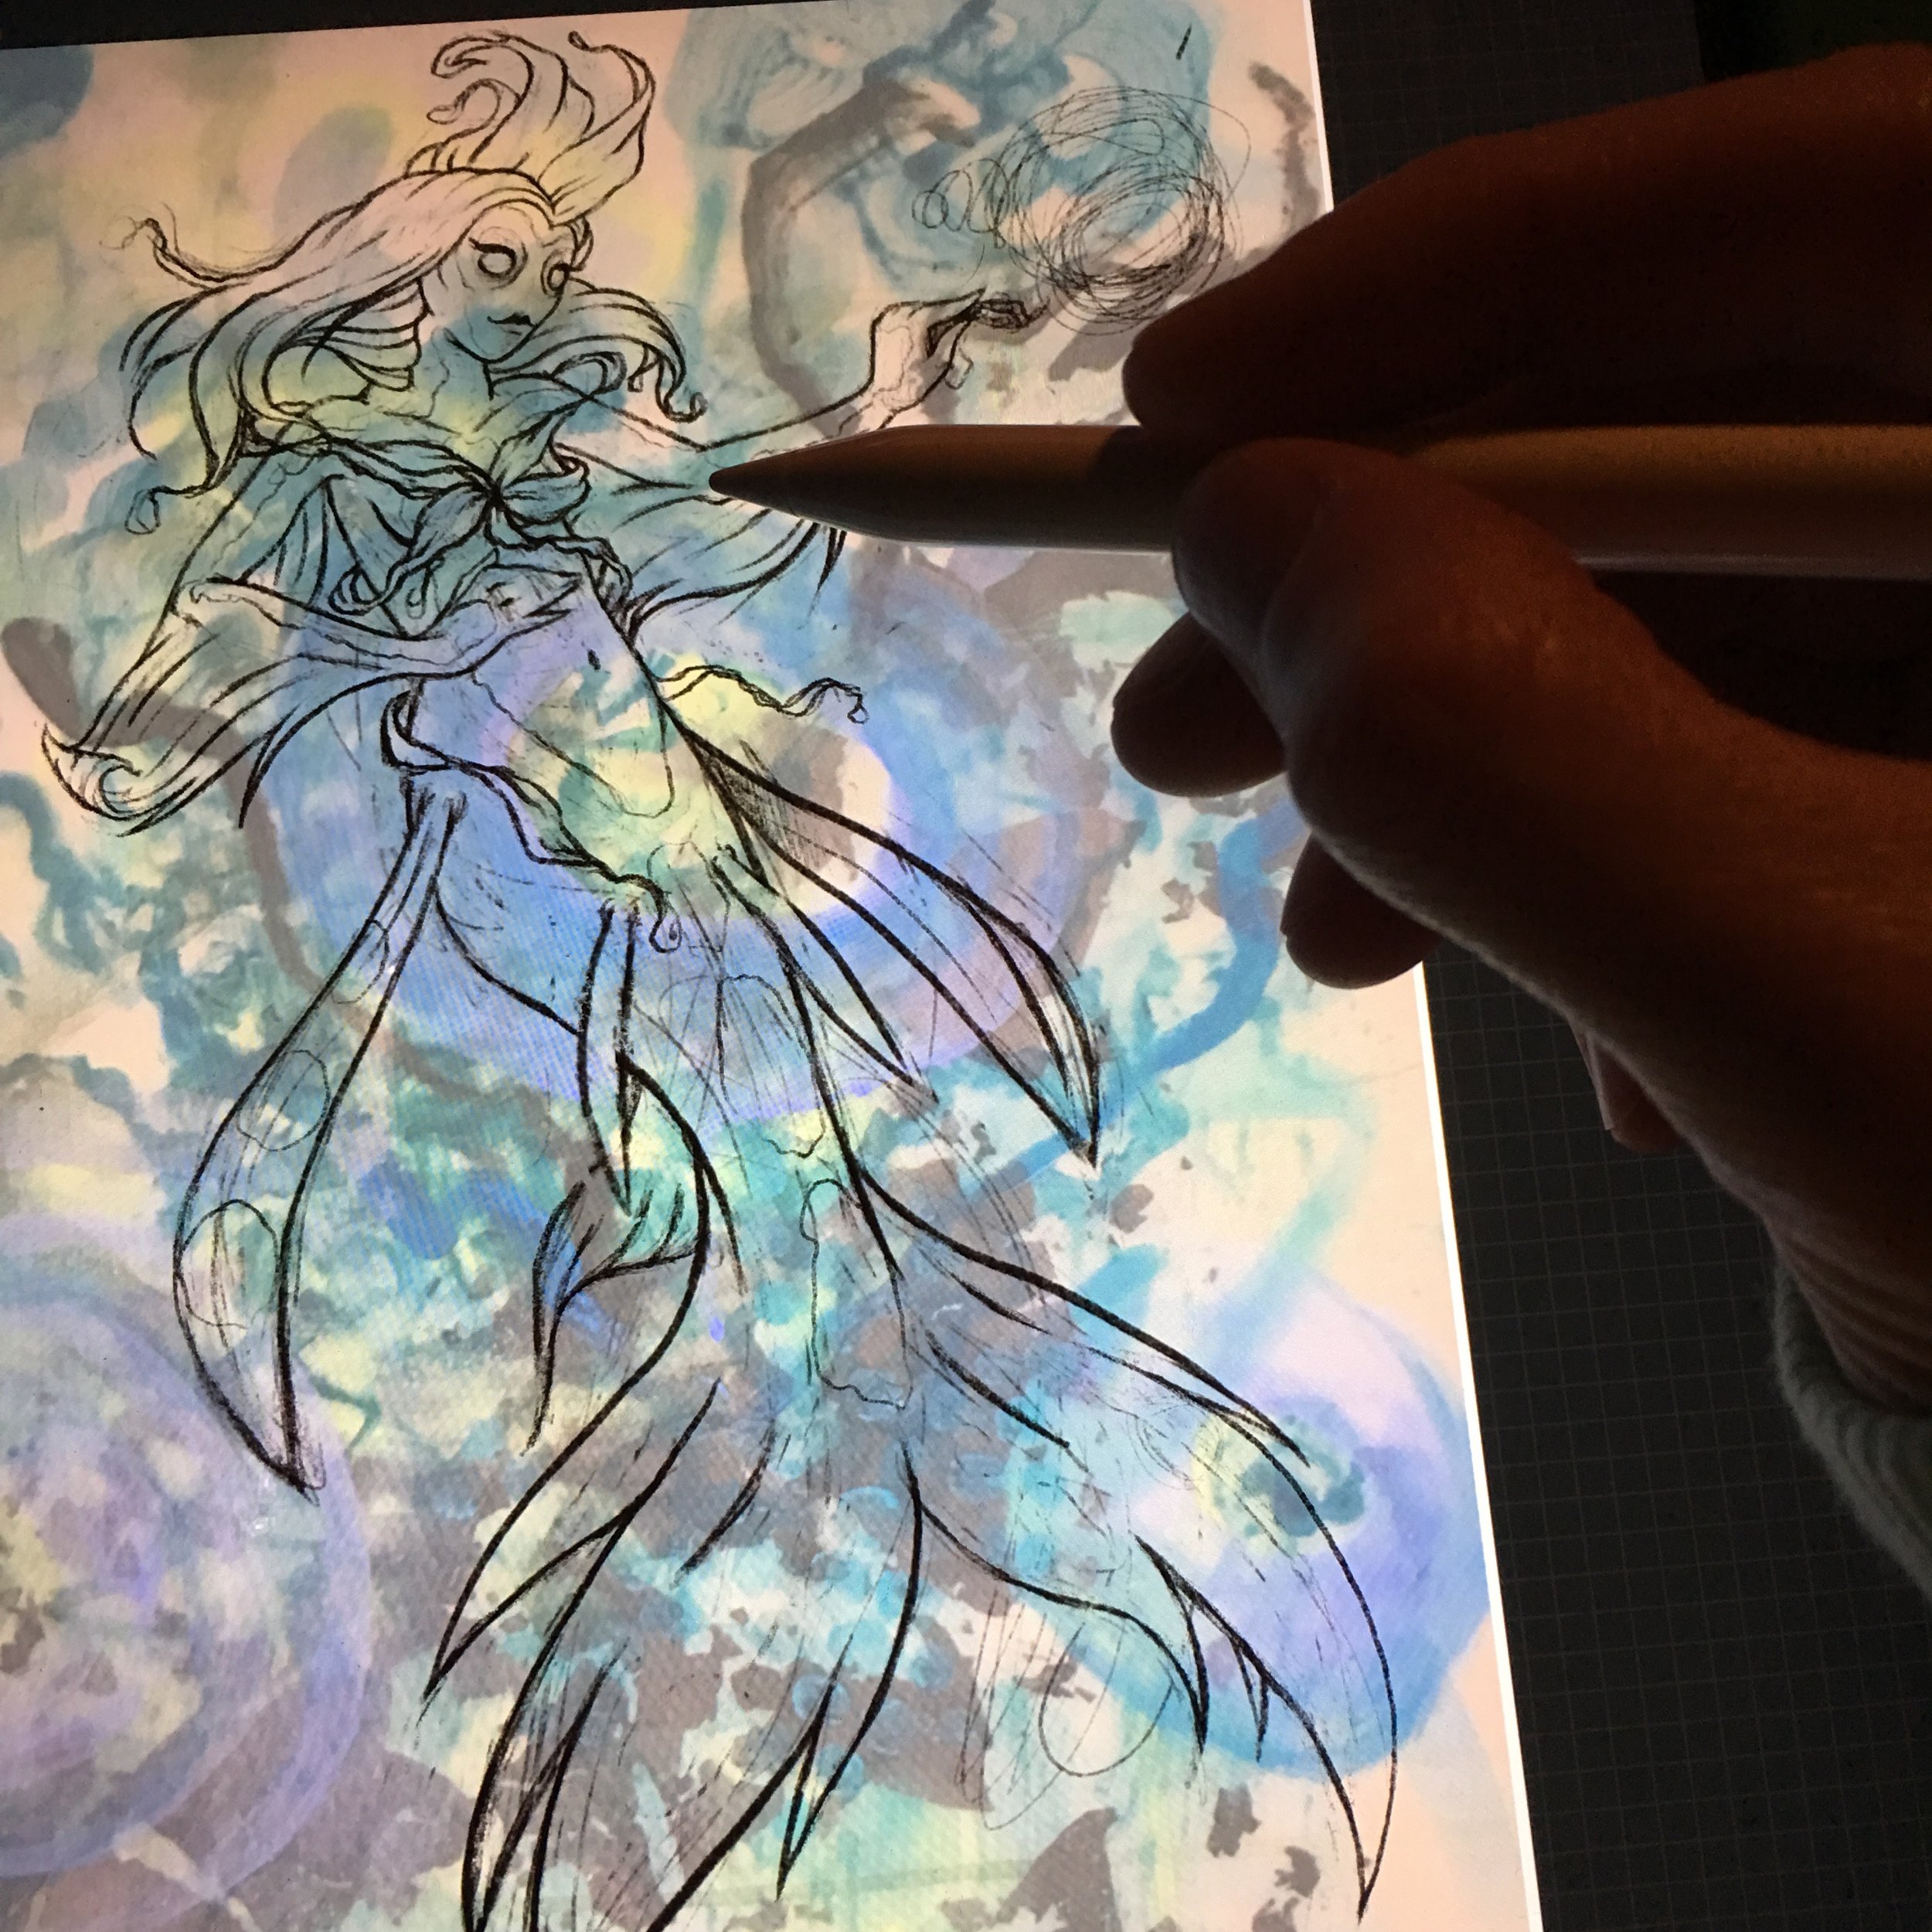 Decided to do a mermaid painting. Working on digital sketch.